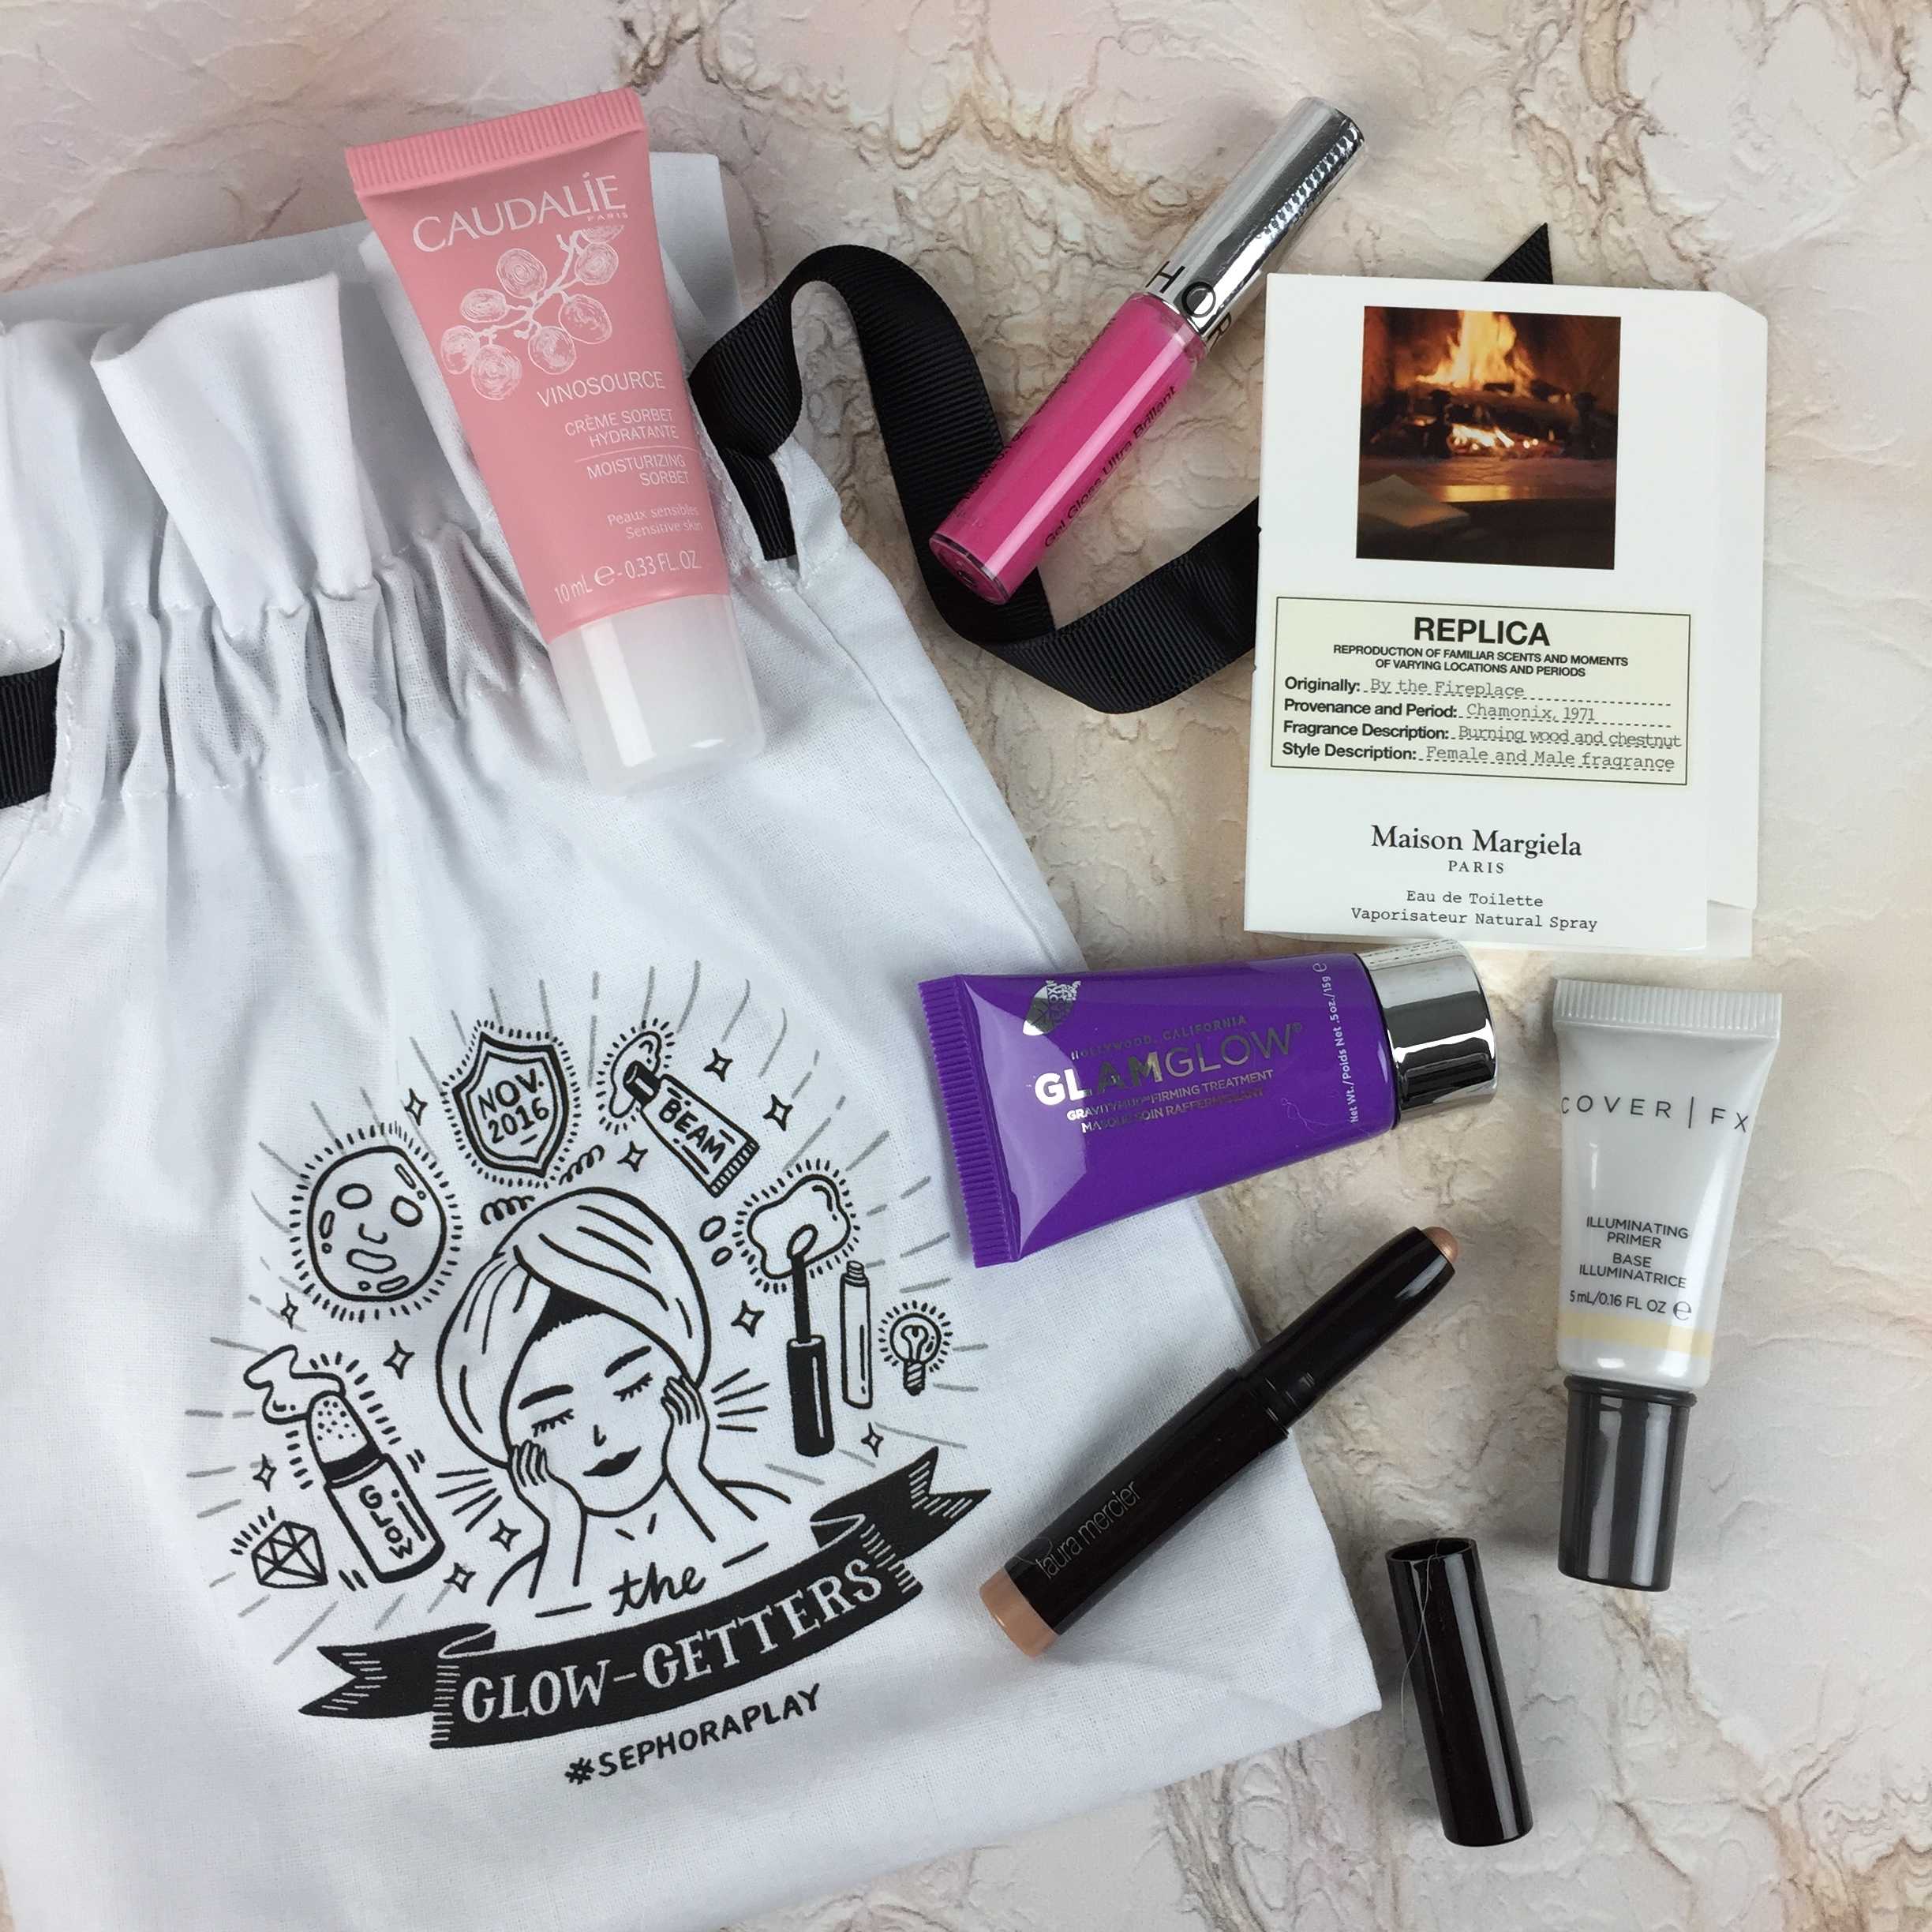 Play! by Sephora November 2016 Subscription Box Review Hello Subscription